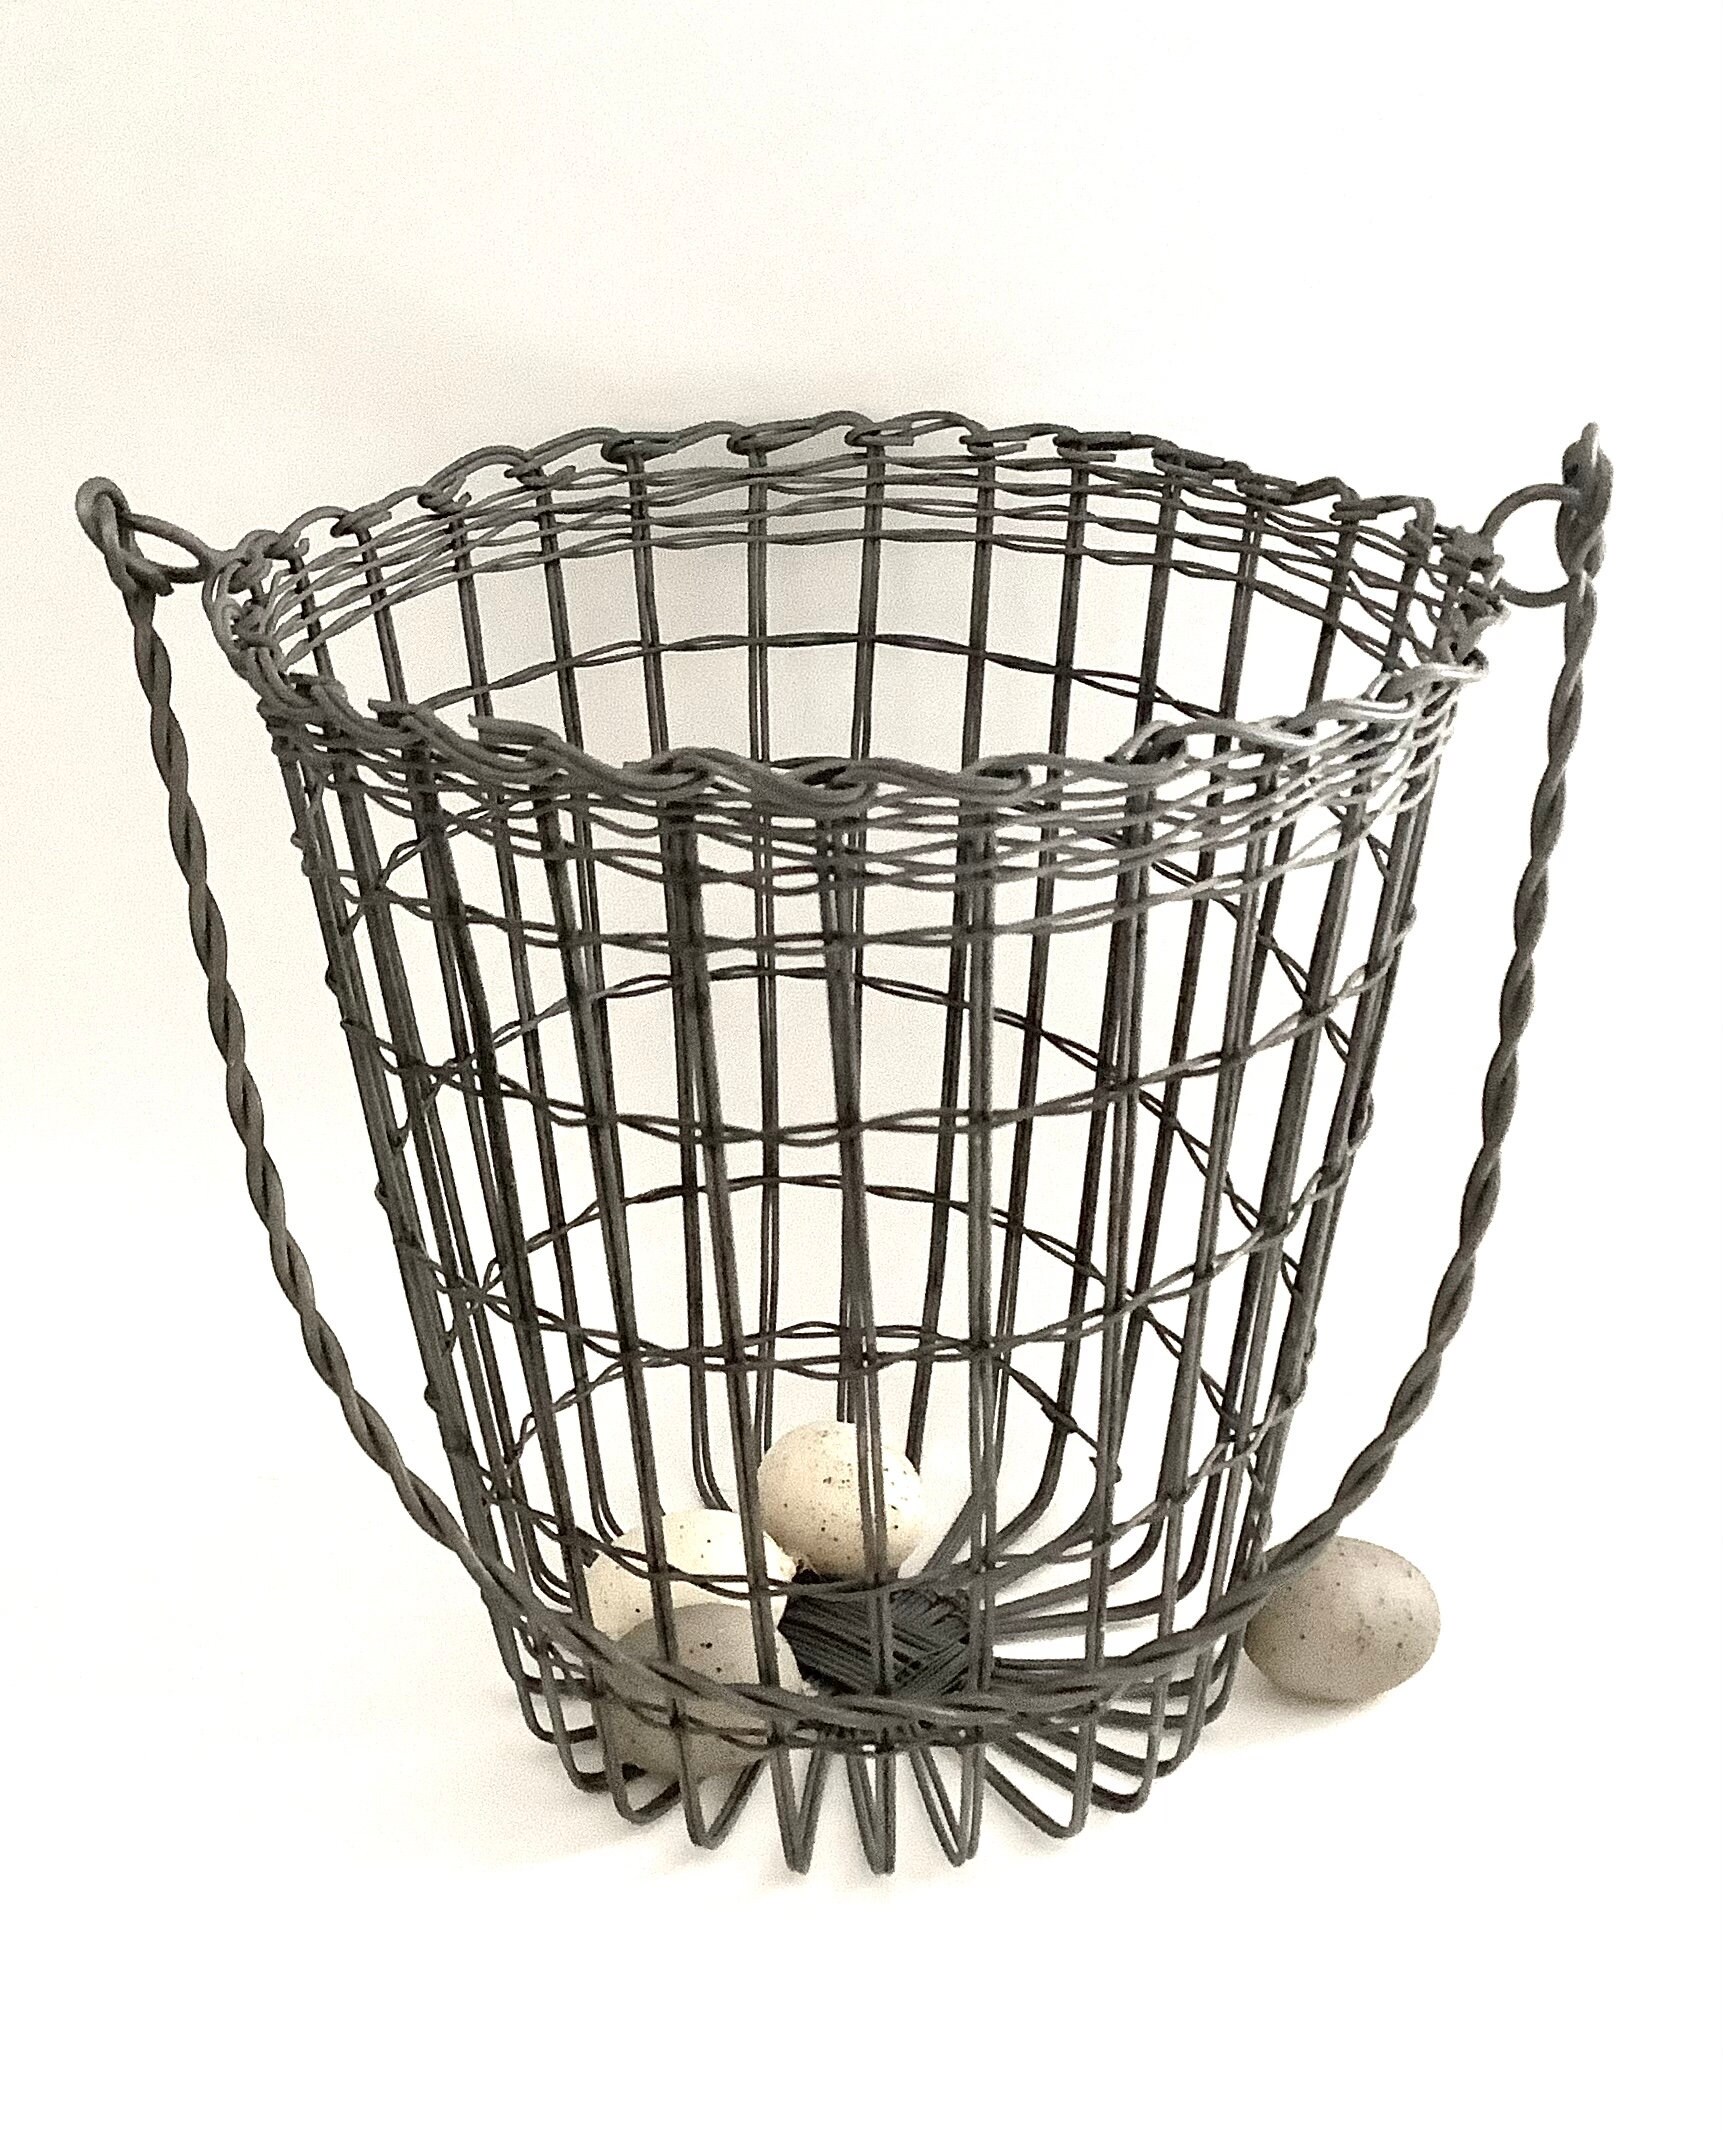 LINCOUNTRY Wire Egg Basket for Gathering Fresh Eggs,Red Egg Baskets for  Fresh Egg Farmhouse,Egg Collecting Basket,Round Metal Egg Basket With